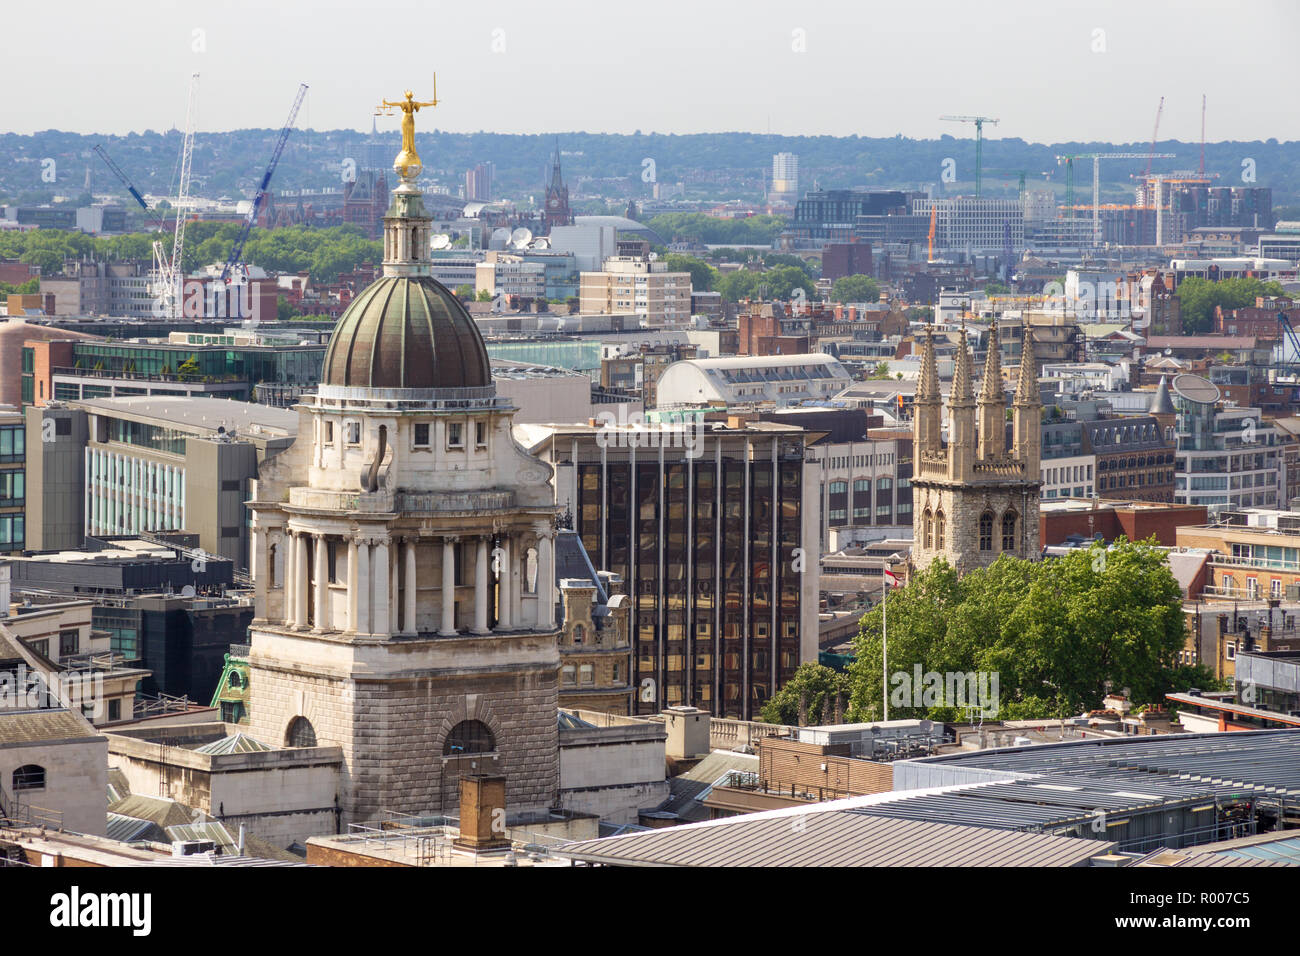 View from St Pauls Cathedral on a part of the london city centre. Stock Photo